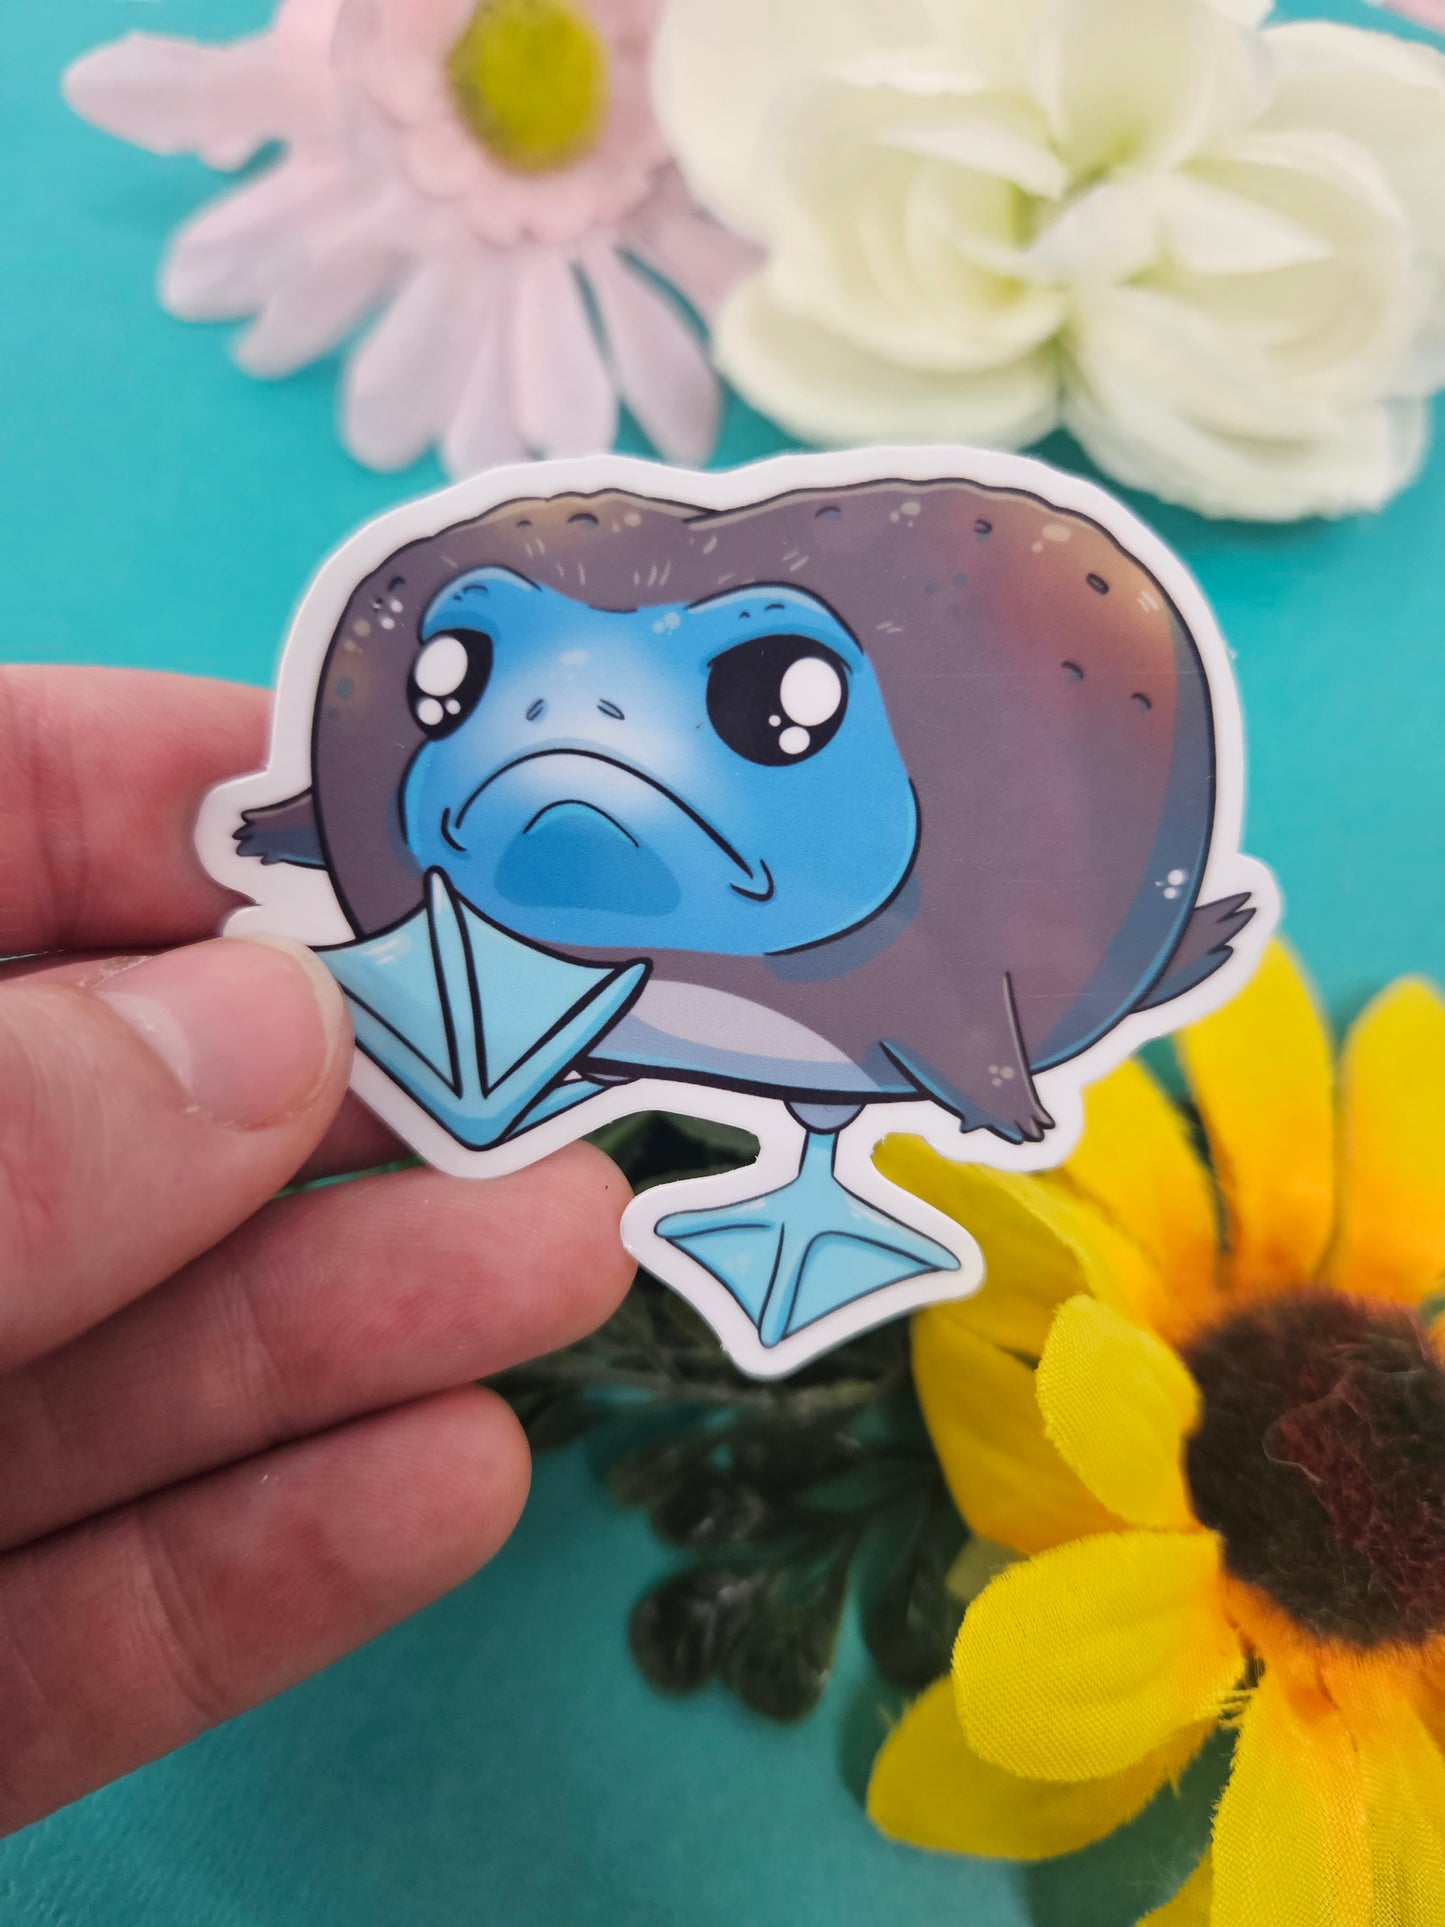 Blue Frooted Frooby Sticker (blue-footed boobies + frog)